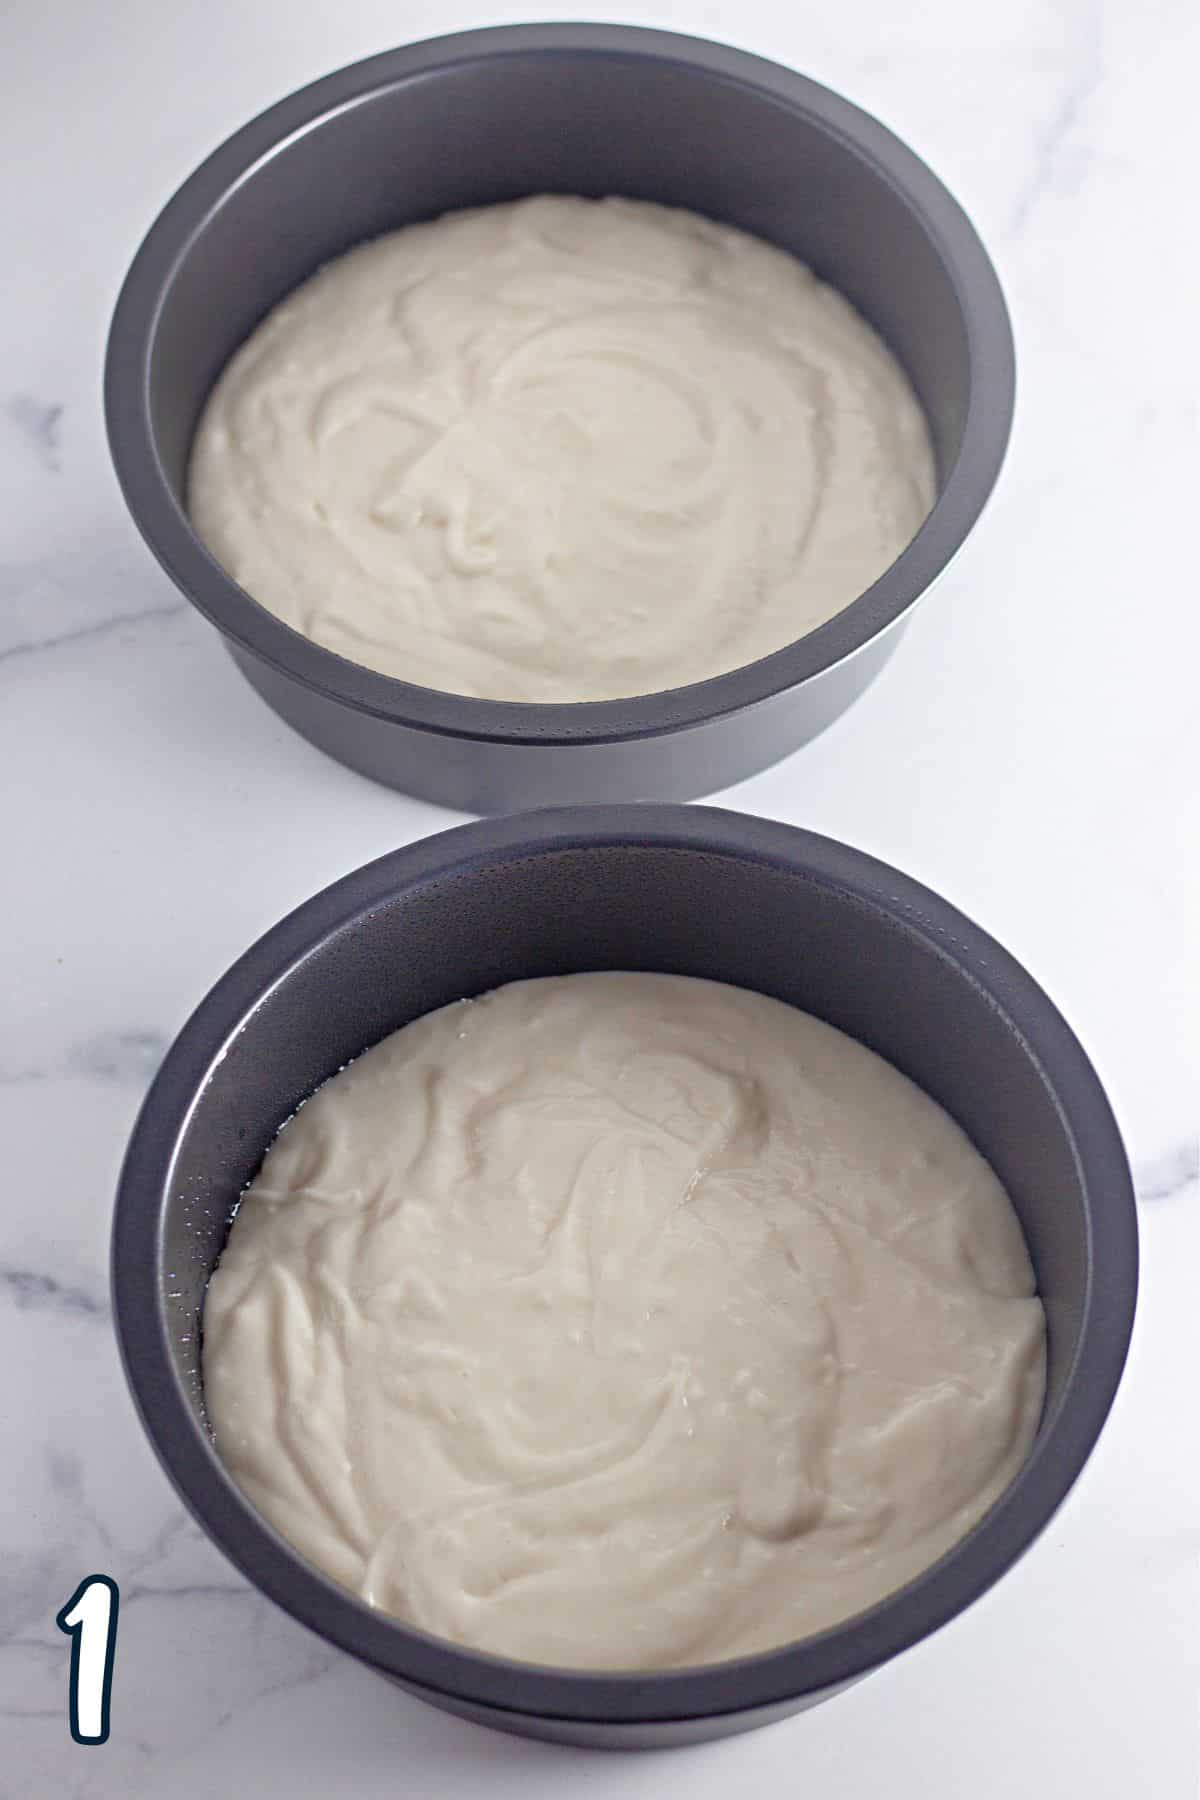 Two cake pans with white batter in them.